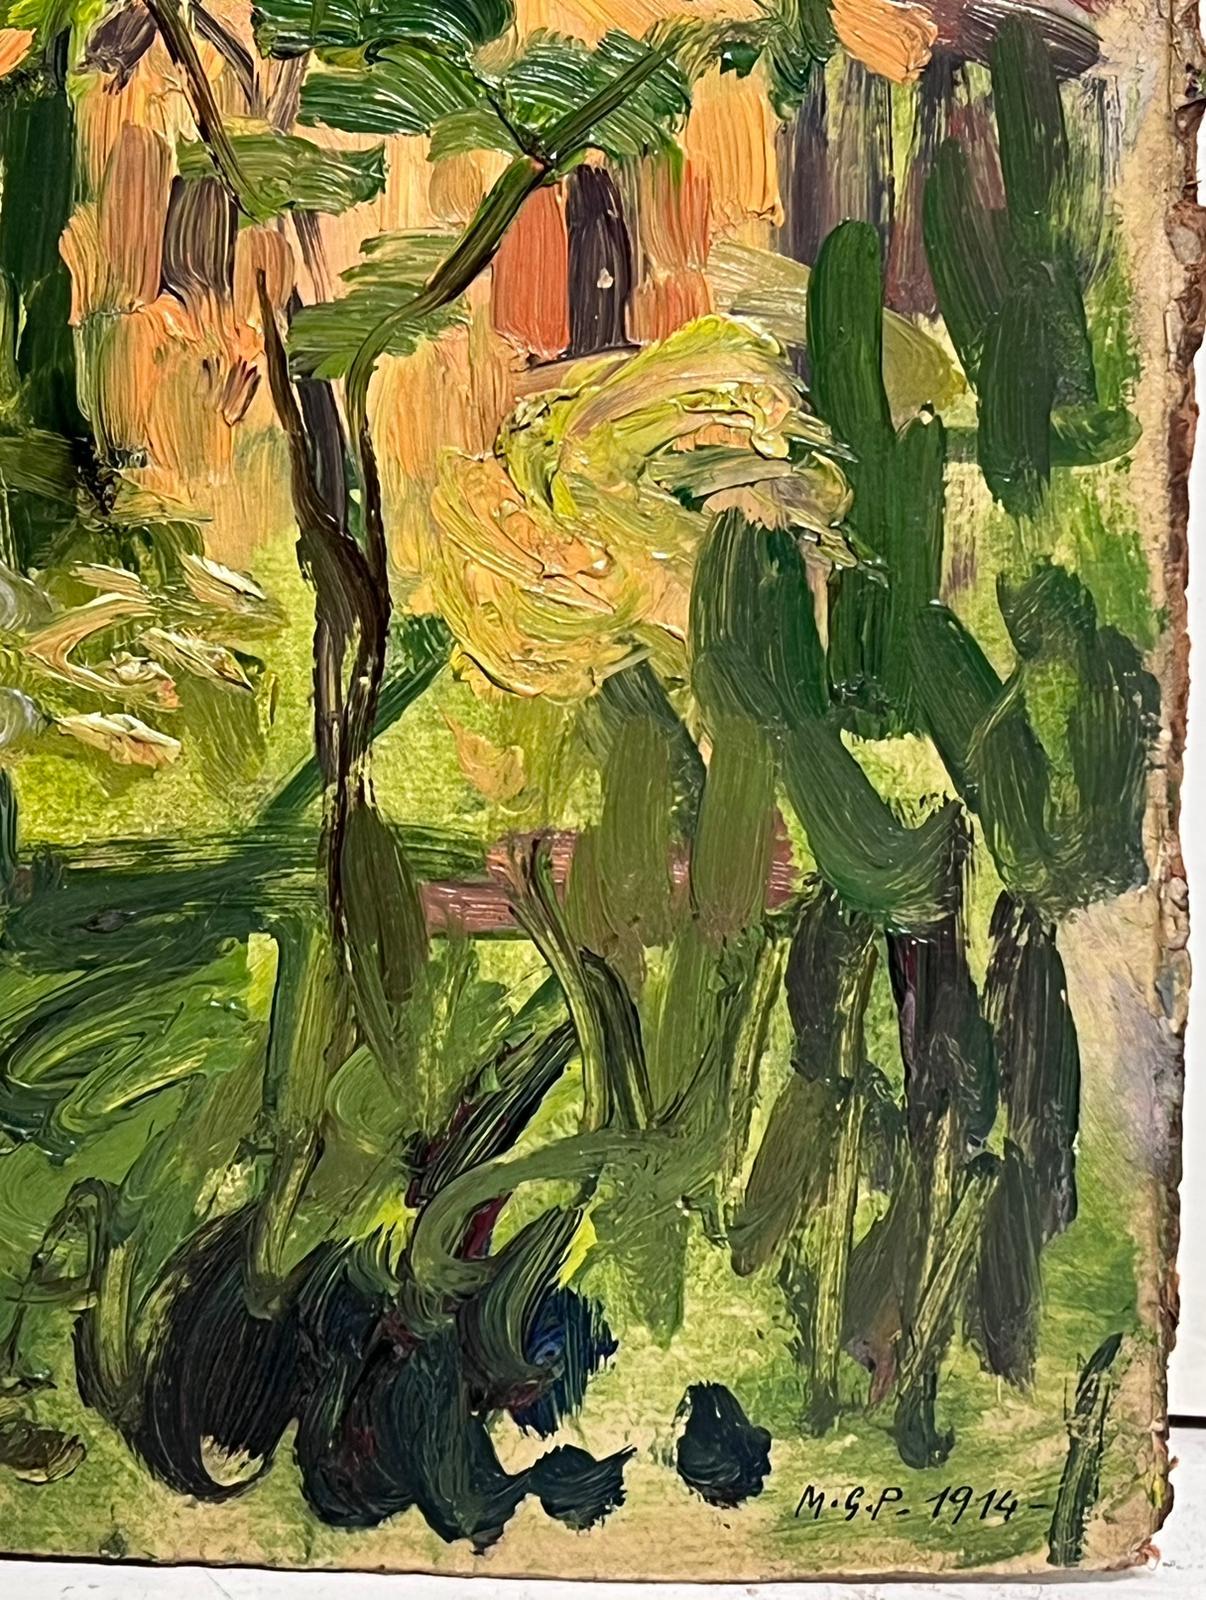 Landscape
by Maurice Georges Poncelet (French, 1897-1978)
oil painting on board, signed initials
dated 1914
11 x 9 inches
condition: overall good and sound though a little shabby from previous storage with the corners and edges being worn.